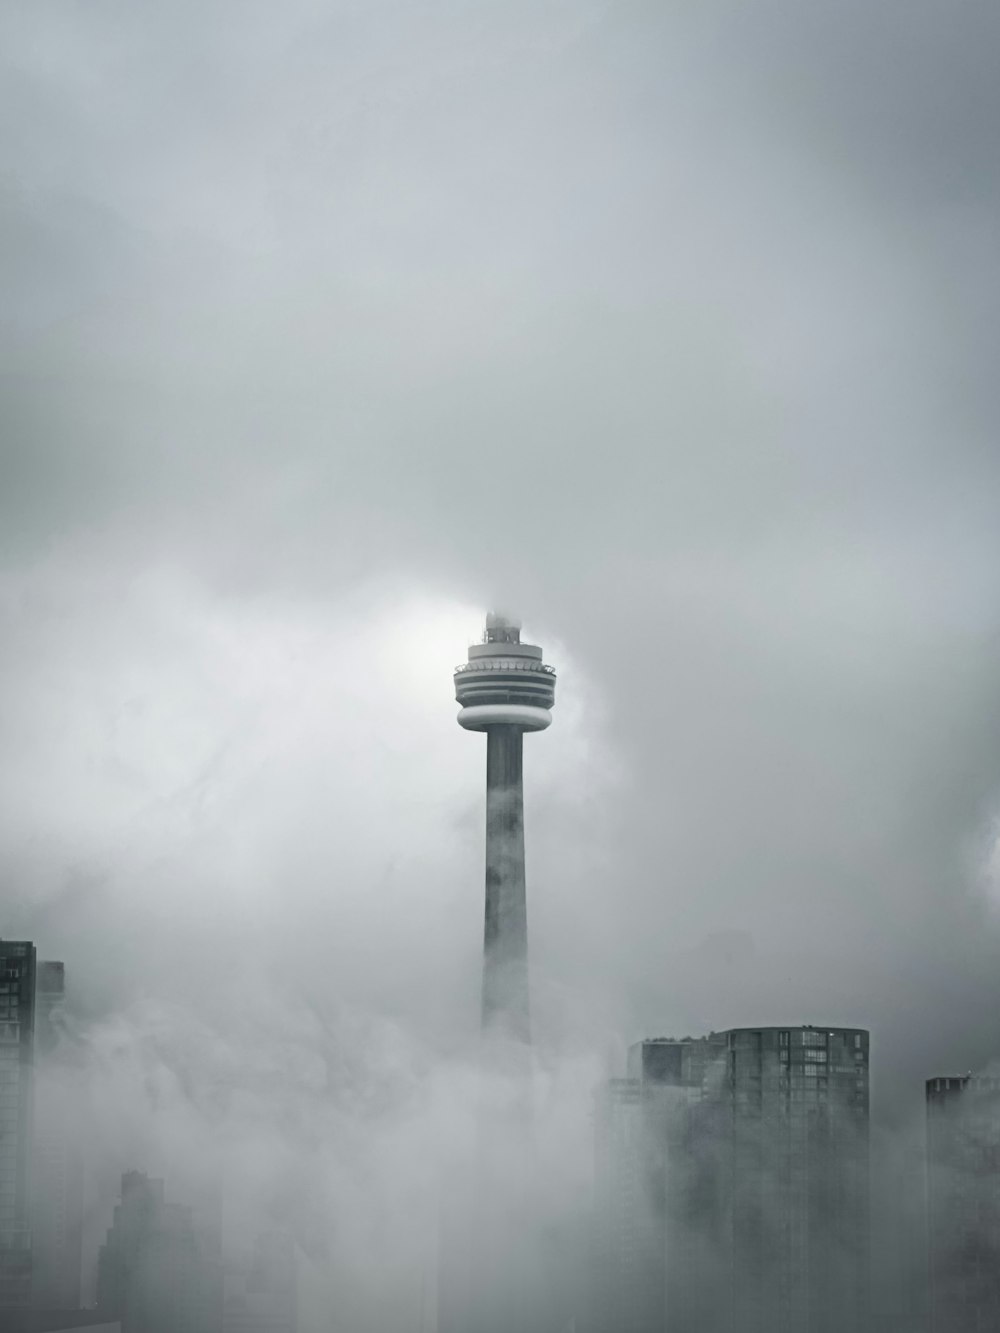 a tall tower towering over a city covered in fog